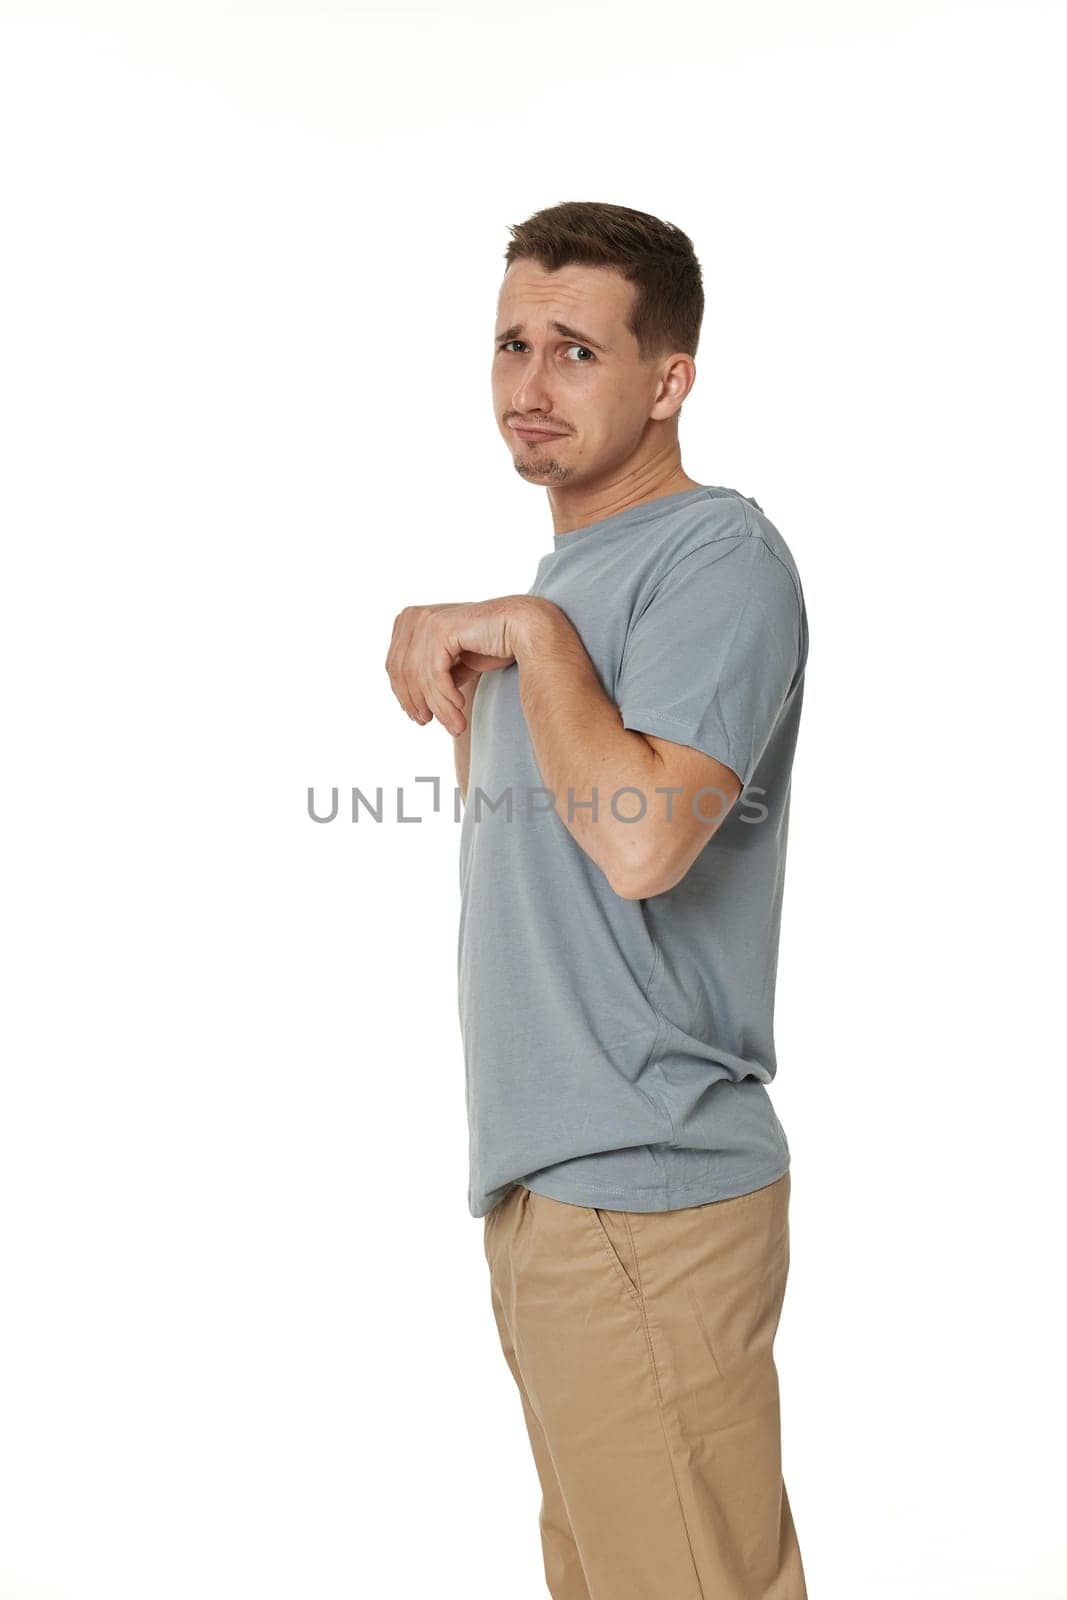 portrait of young funny man grimacing on white background